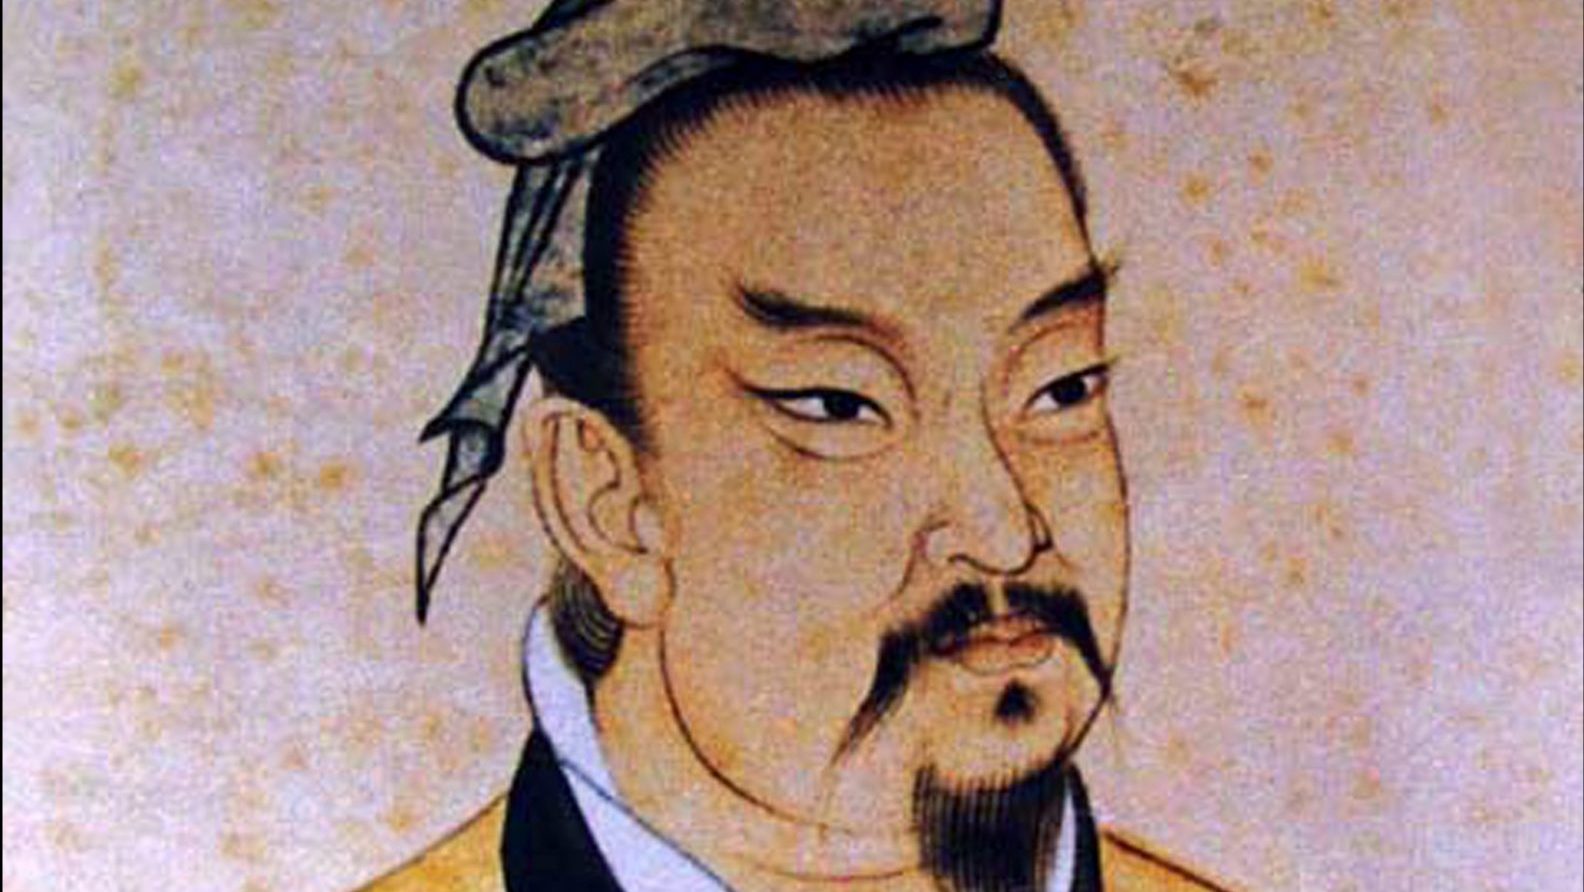 Sun Wu, style name Changqing, better known as Sun Tzu or Sunzi (Photo by: Pictures From History/Universal Images Group via Getty Images)